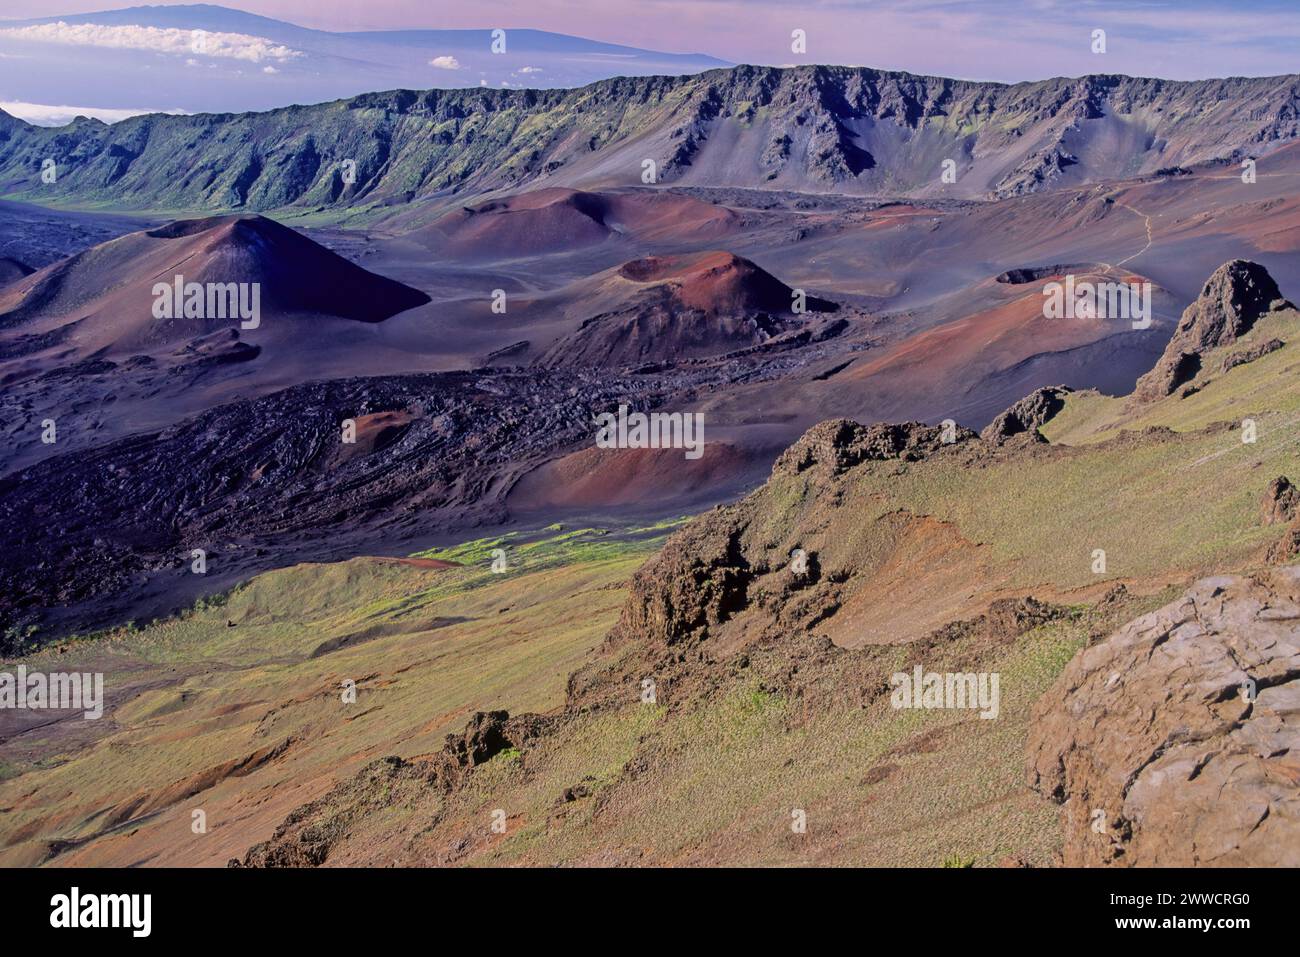 Haleakalā National Park is an American national park located on the island of Maui in the state of Hawaii. Stock Photo